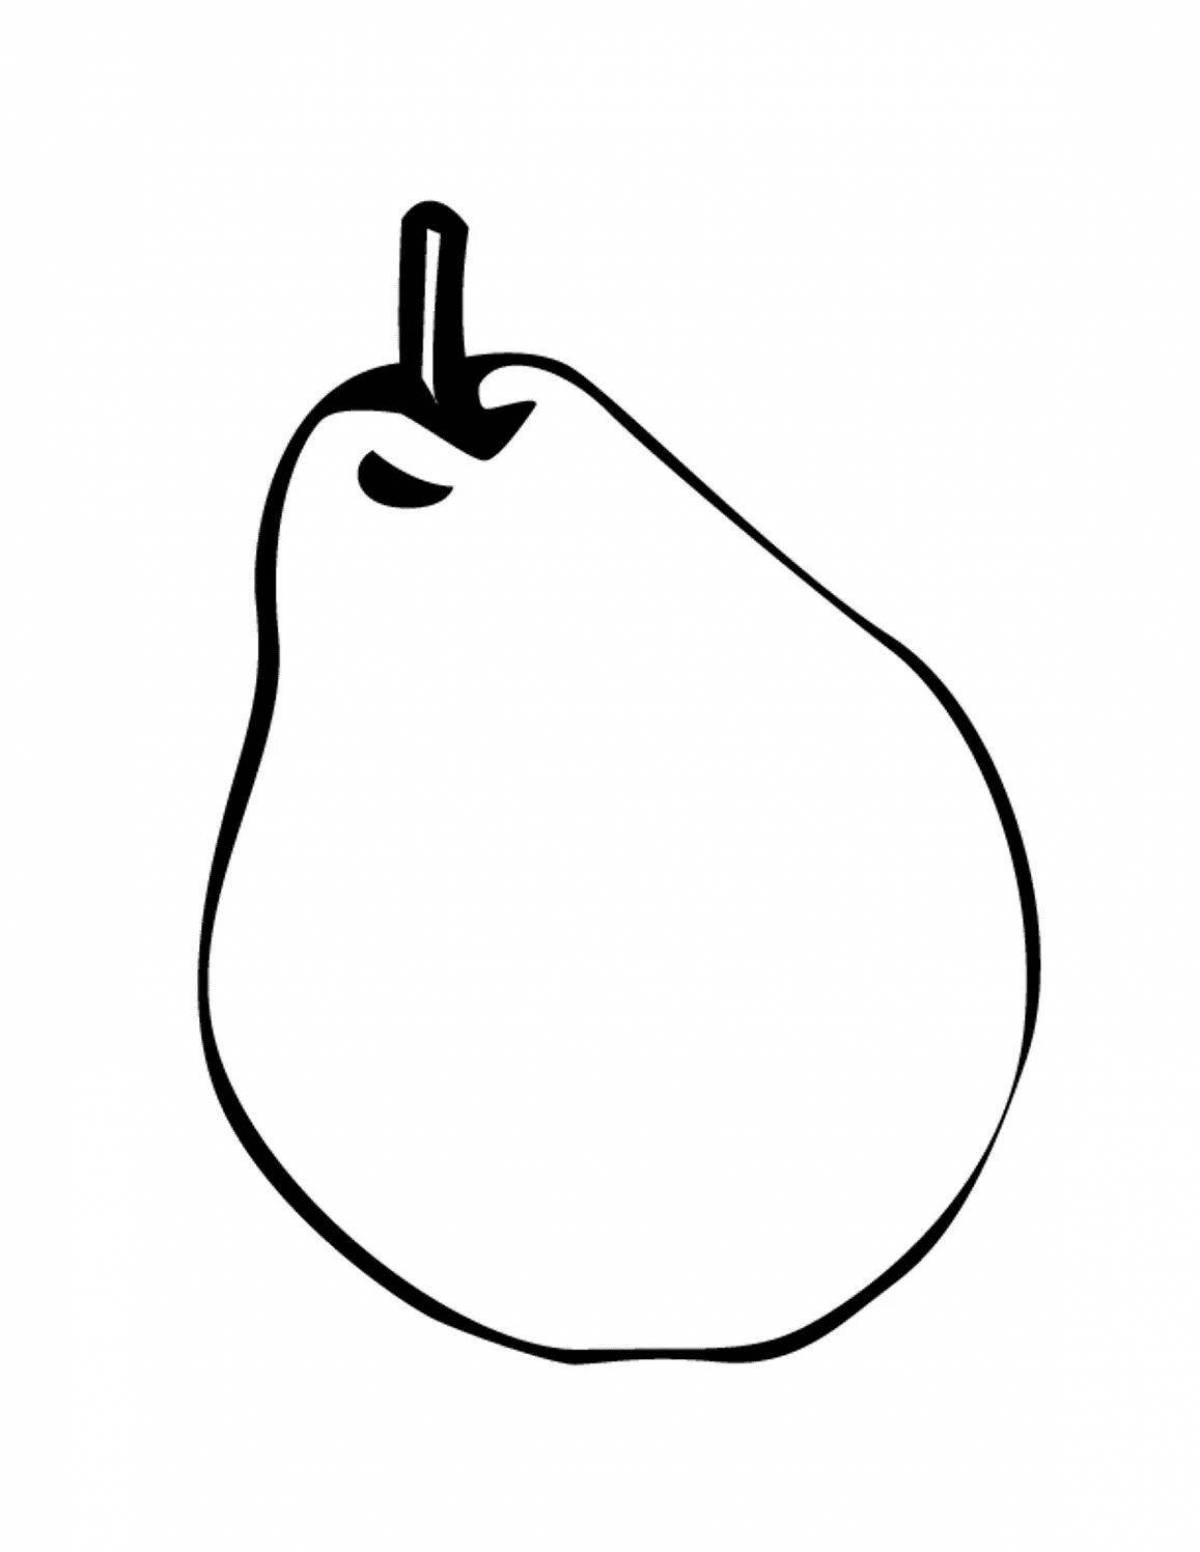 Delightful apple pear coloring page